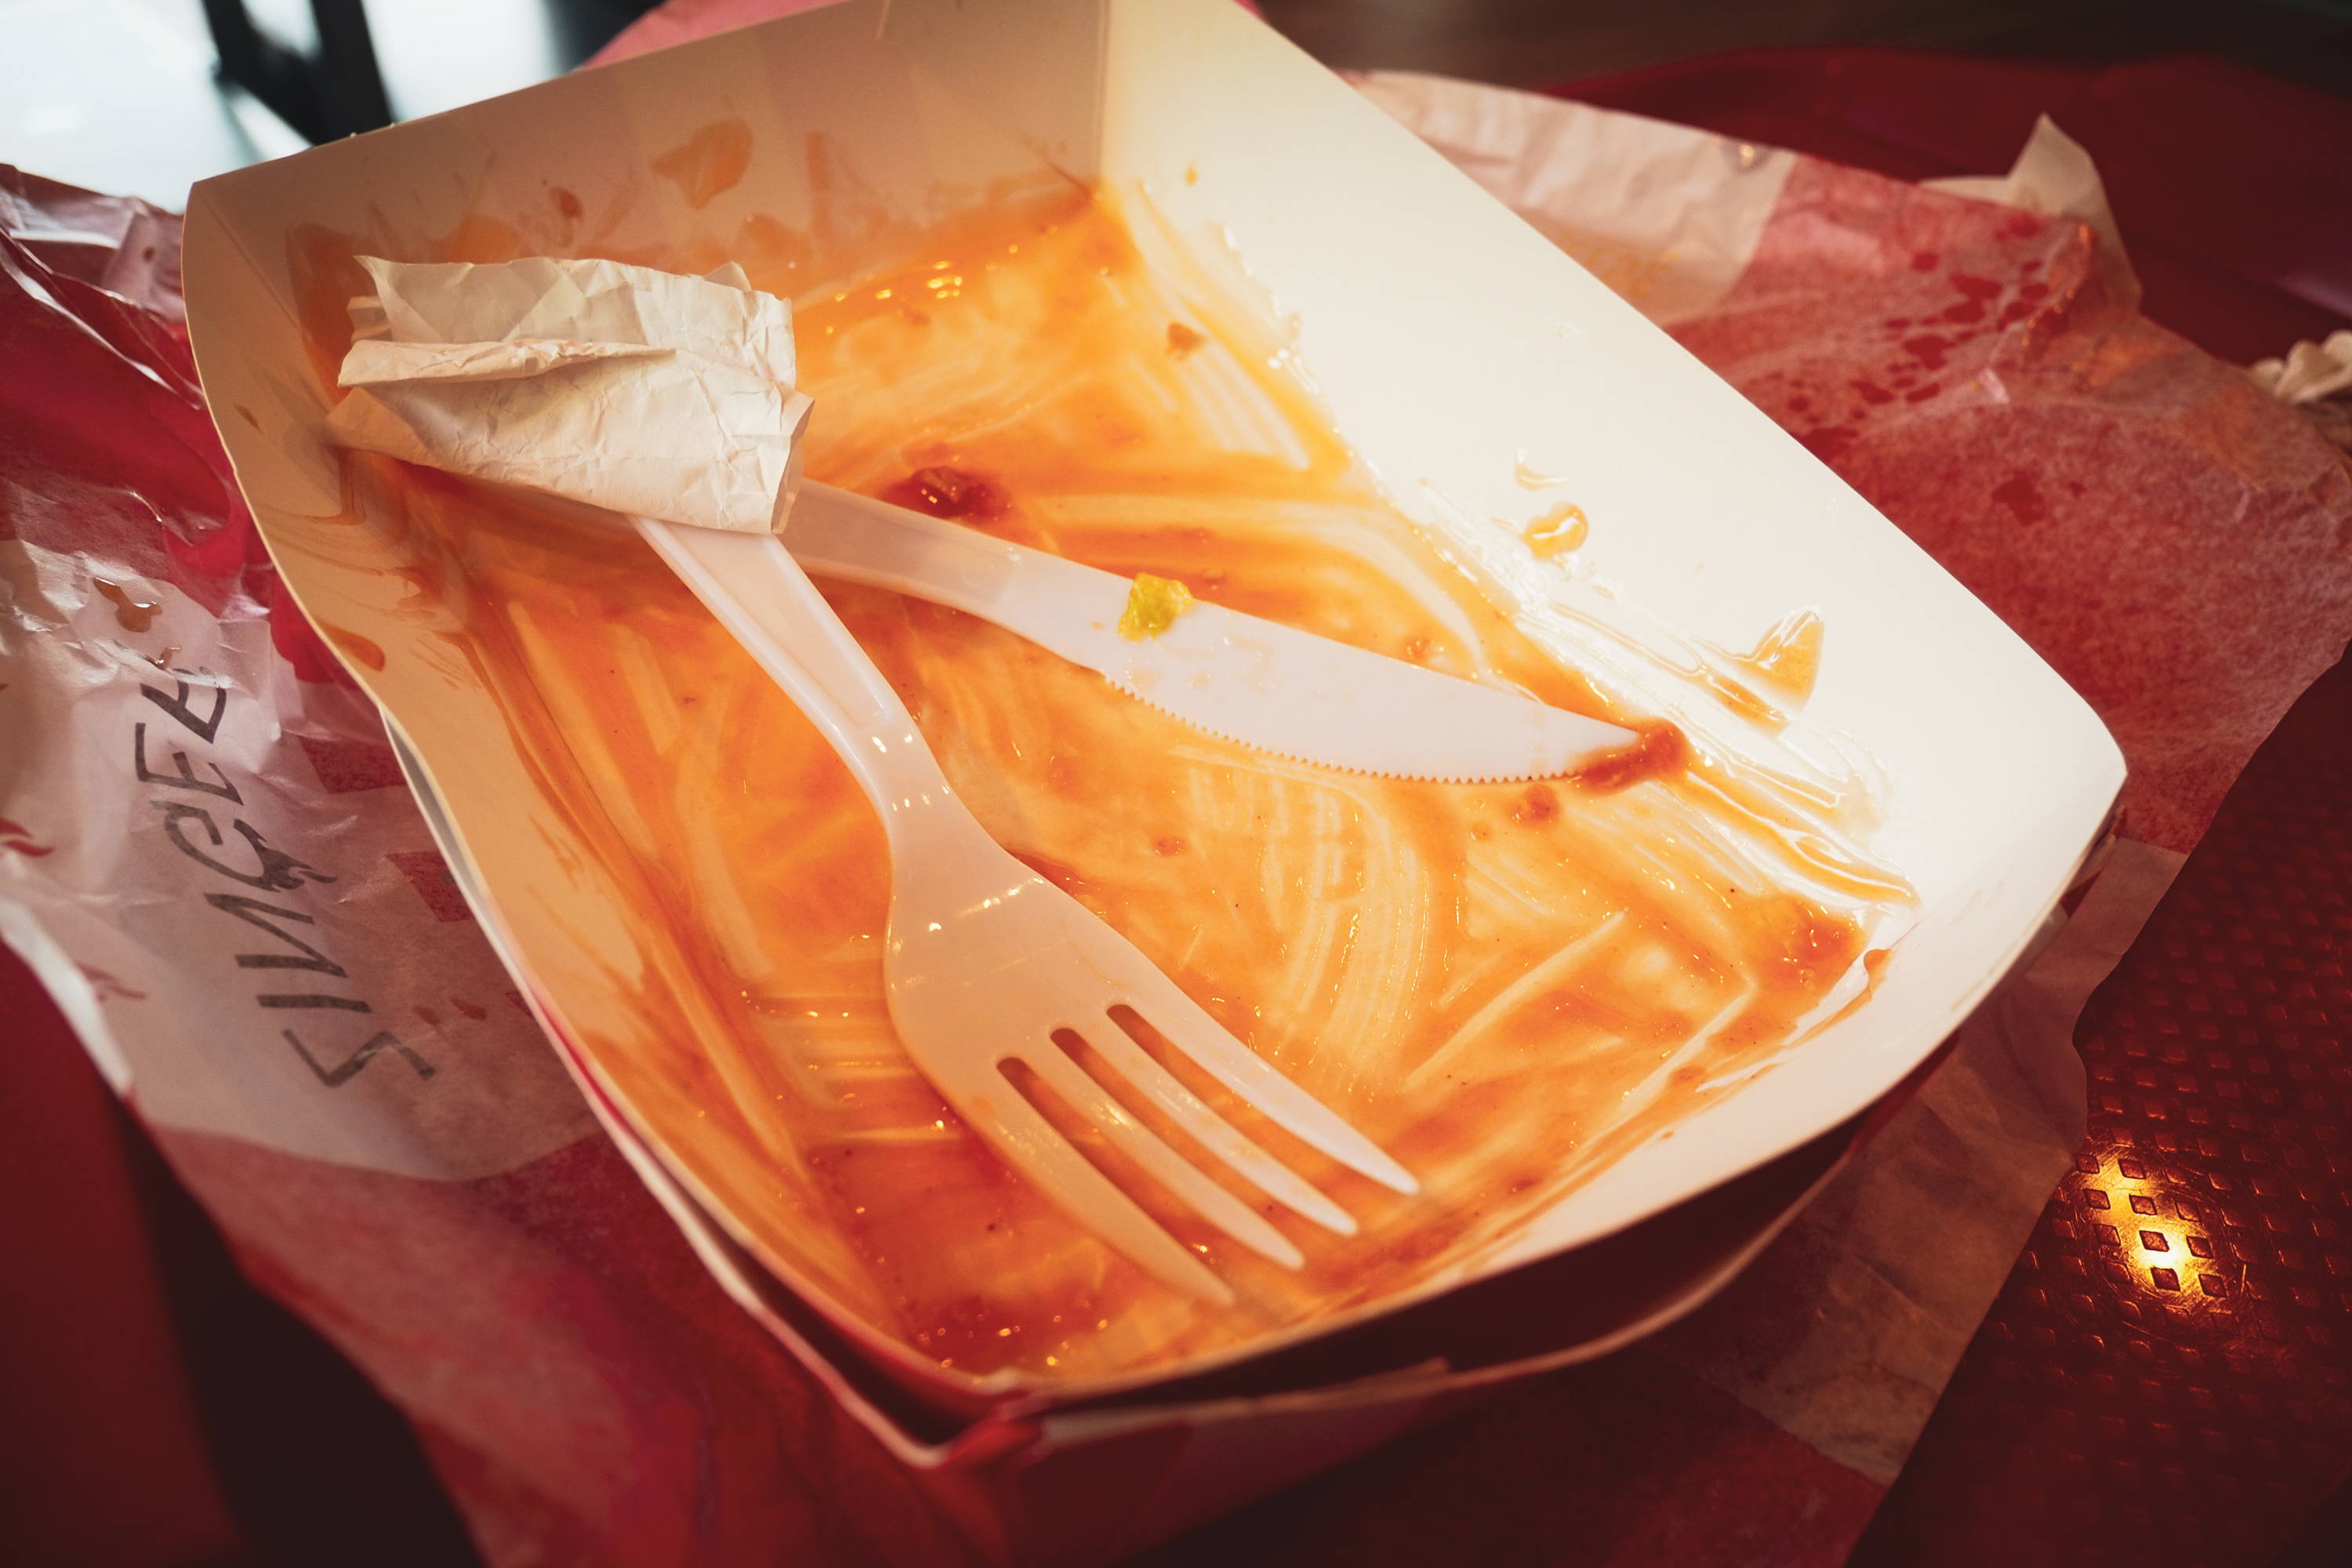 Paper food trays and plastic cutlery soiled with sauce and food scraps